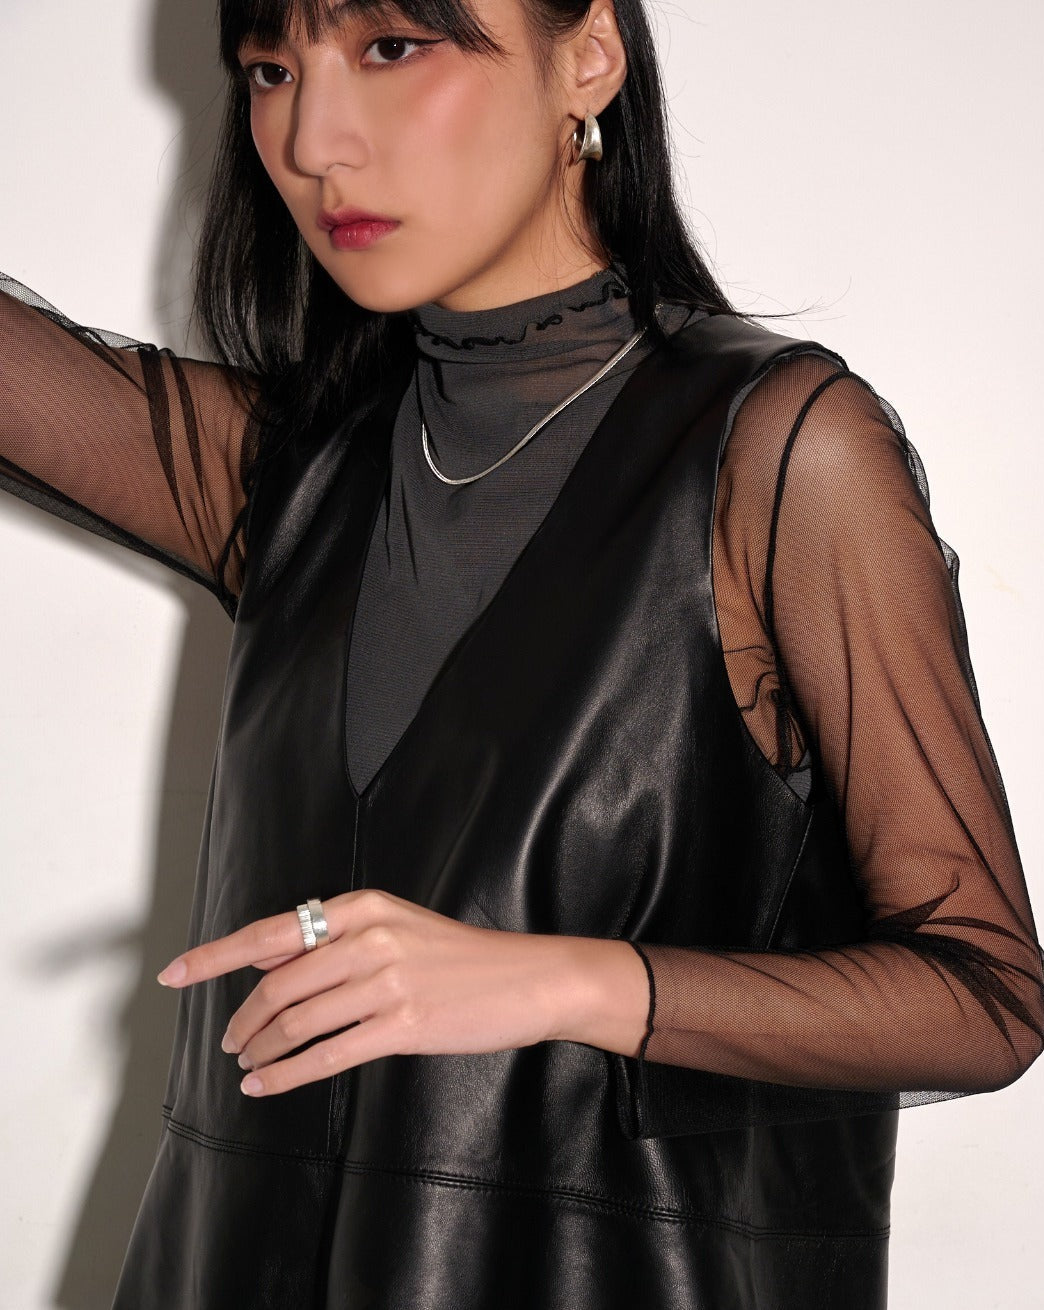 aalis TEXAS v neck leather top (Black)